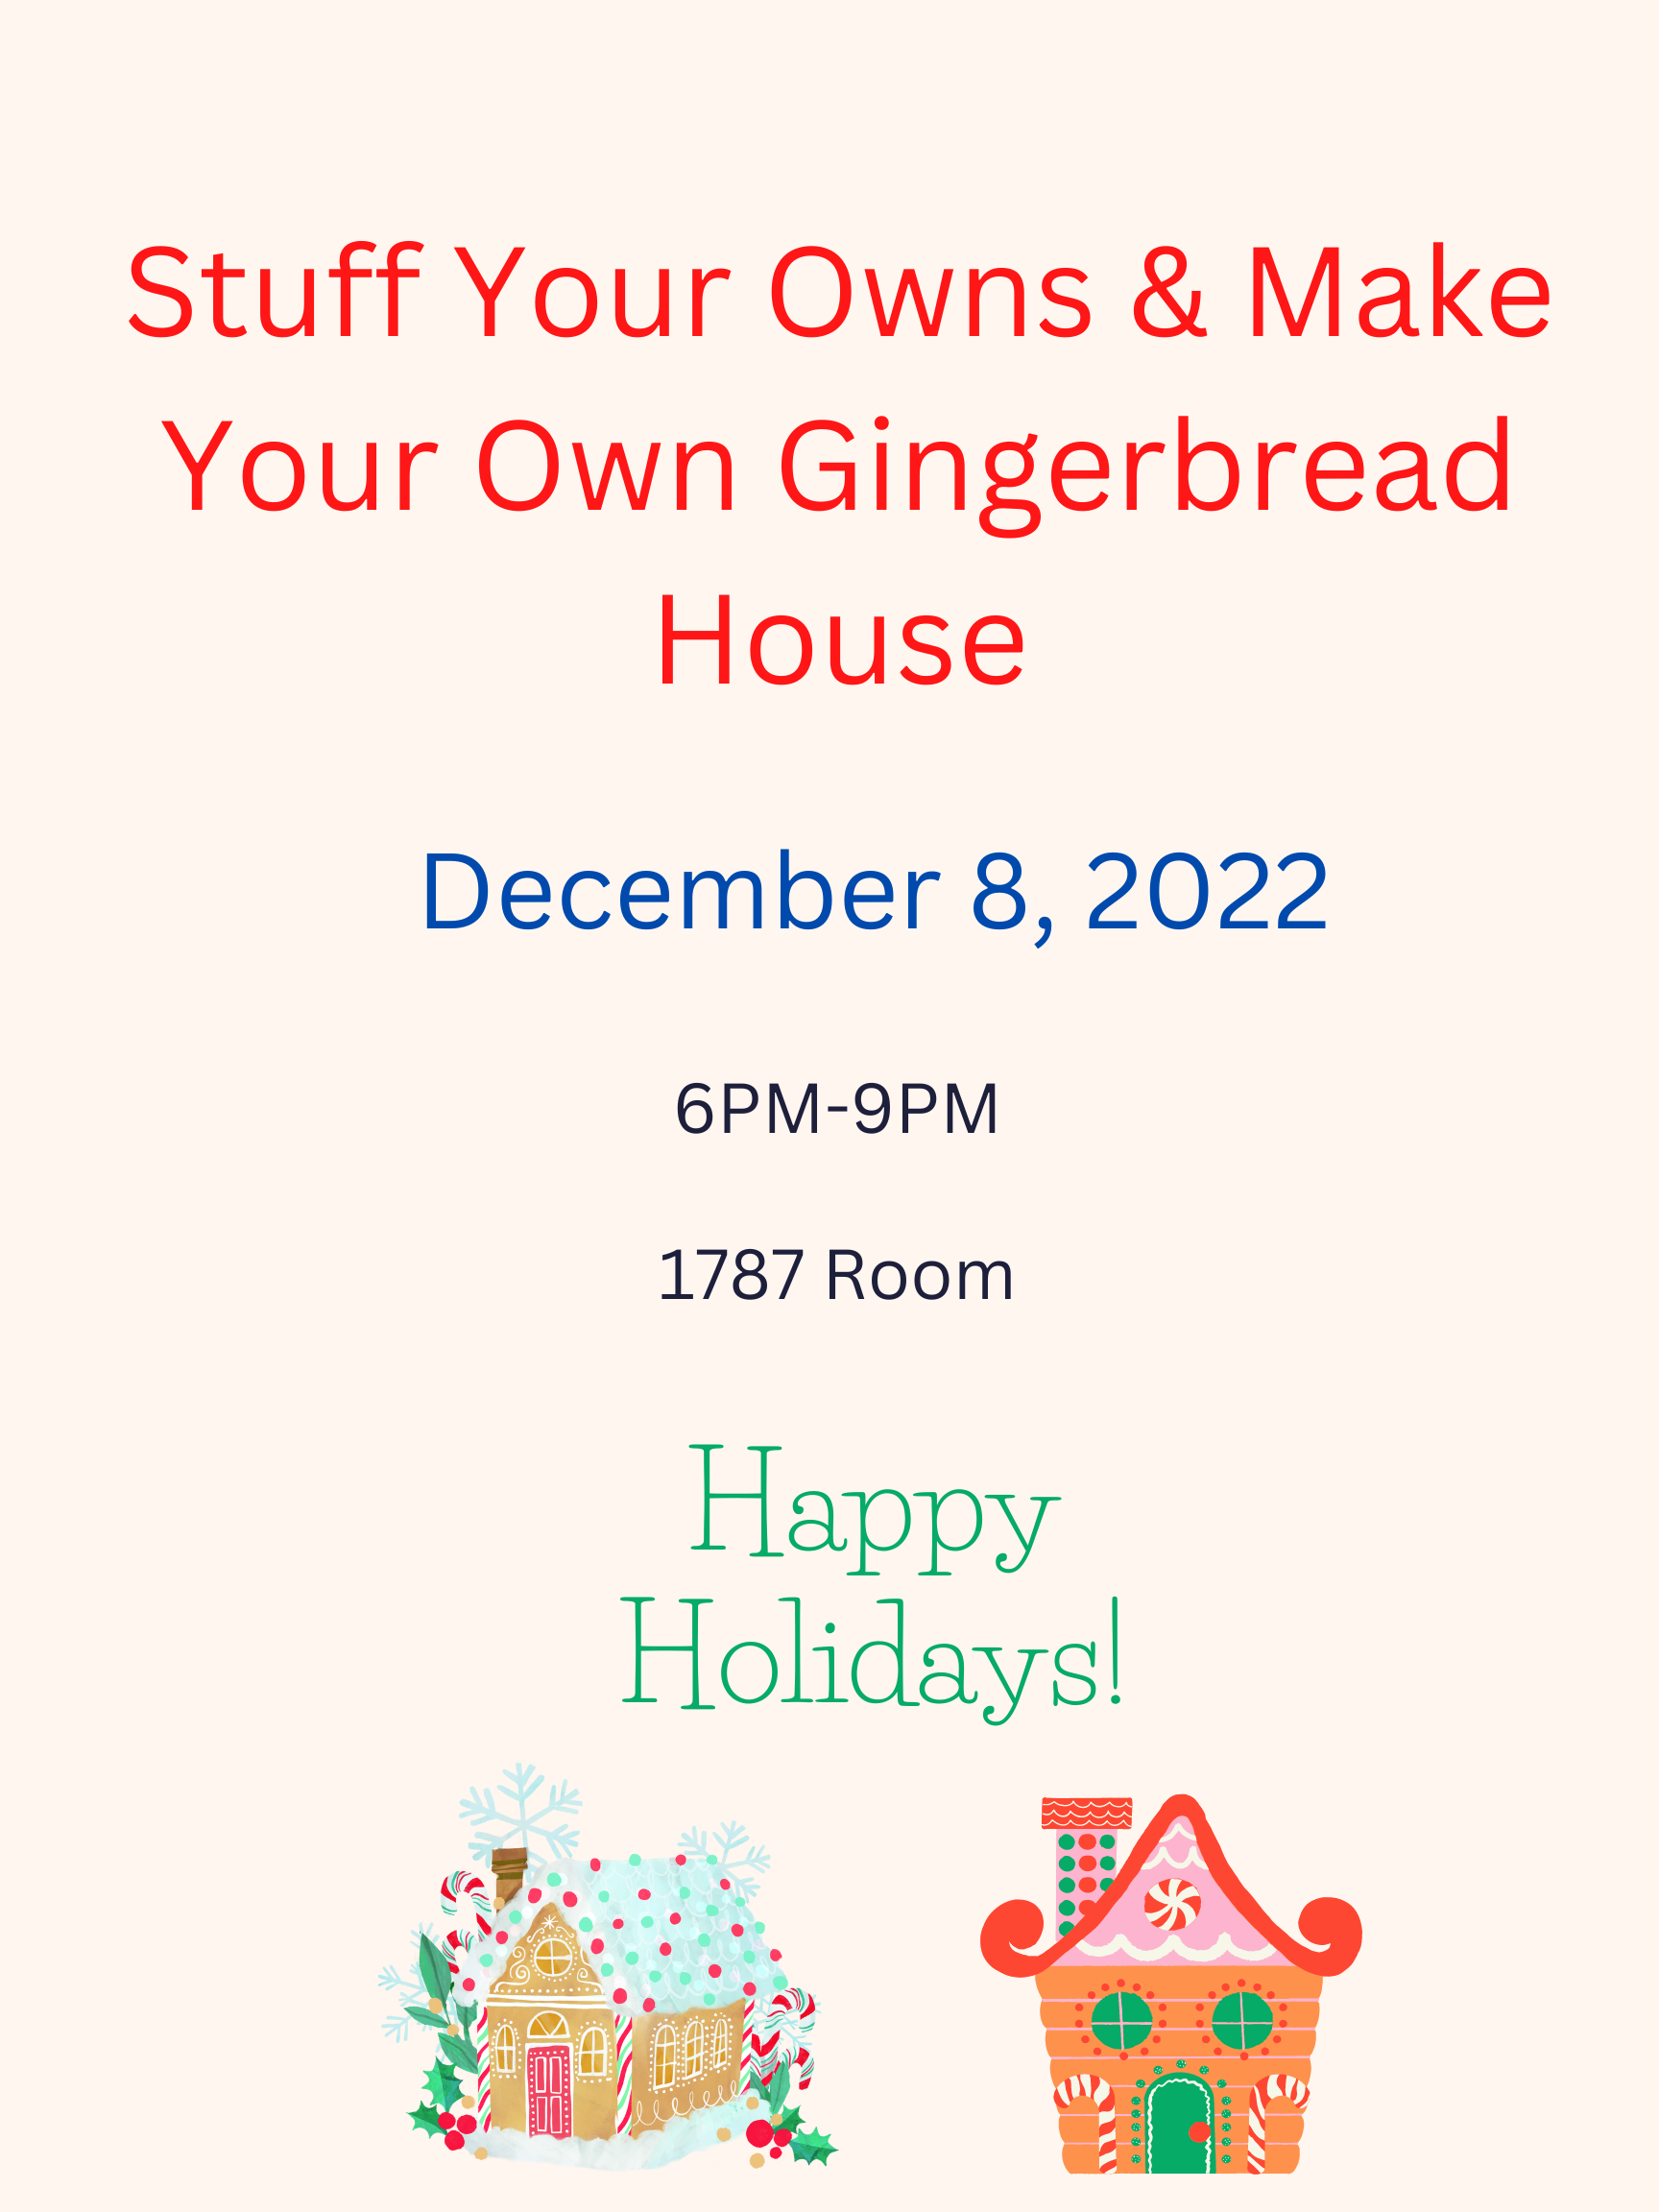 Stuff-Your-Owns and Make Your Own Gingerbread House!